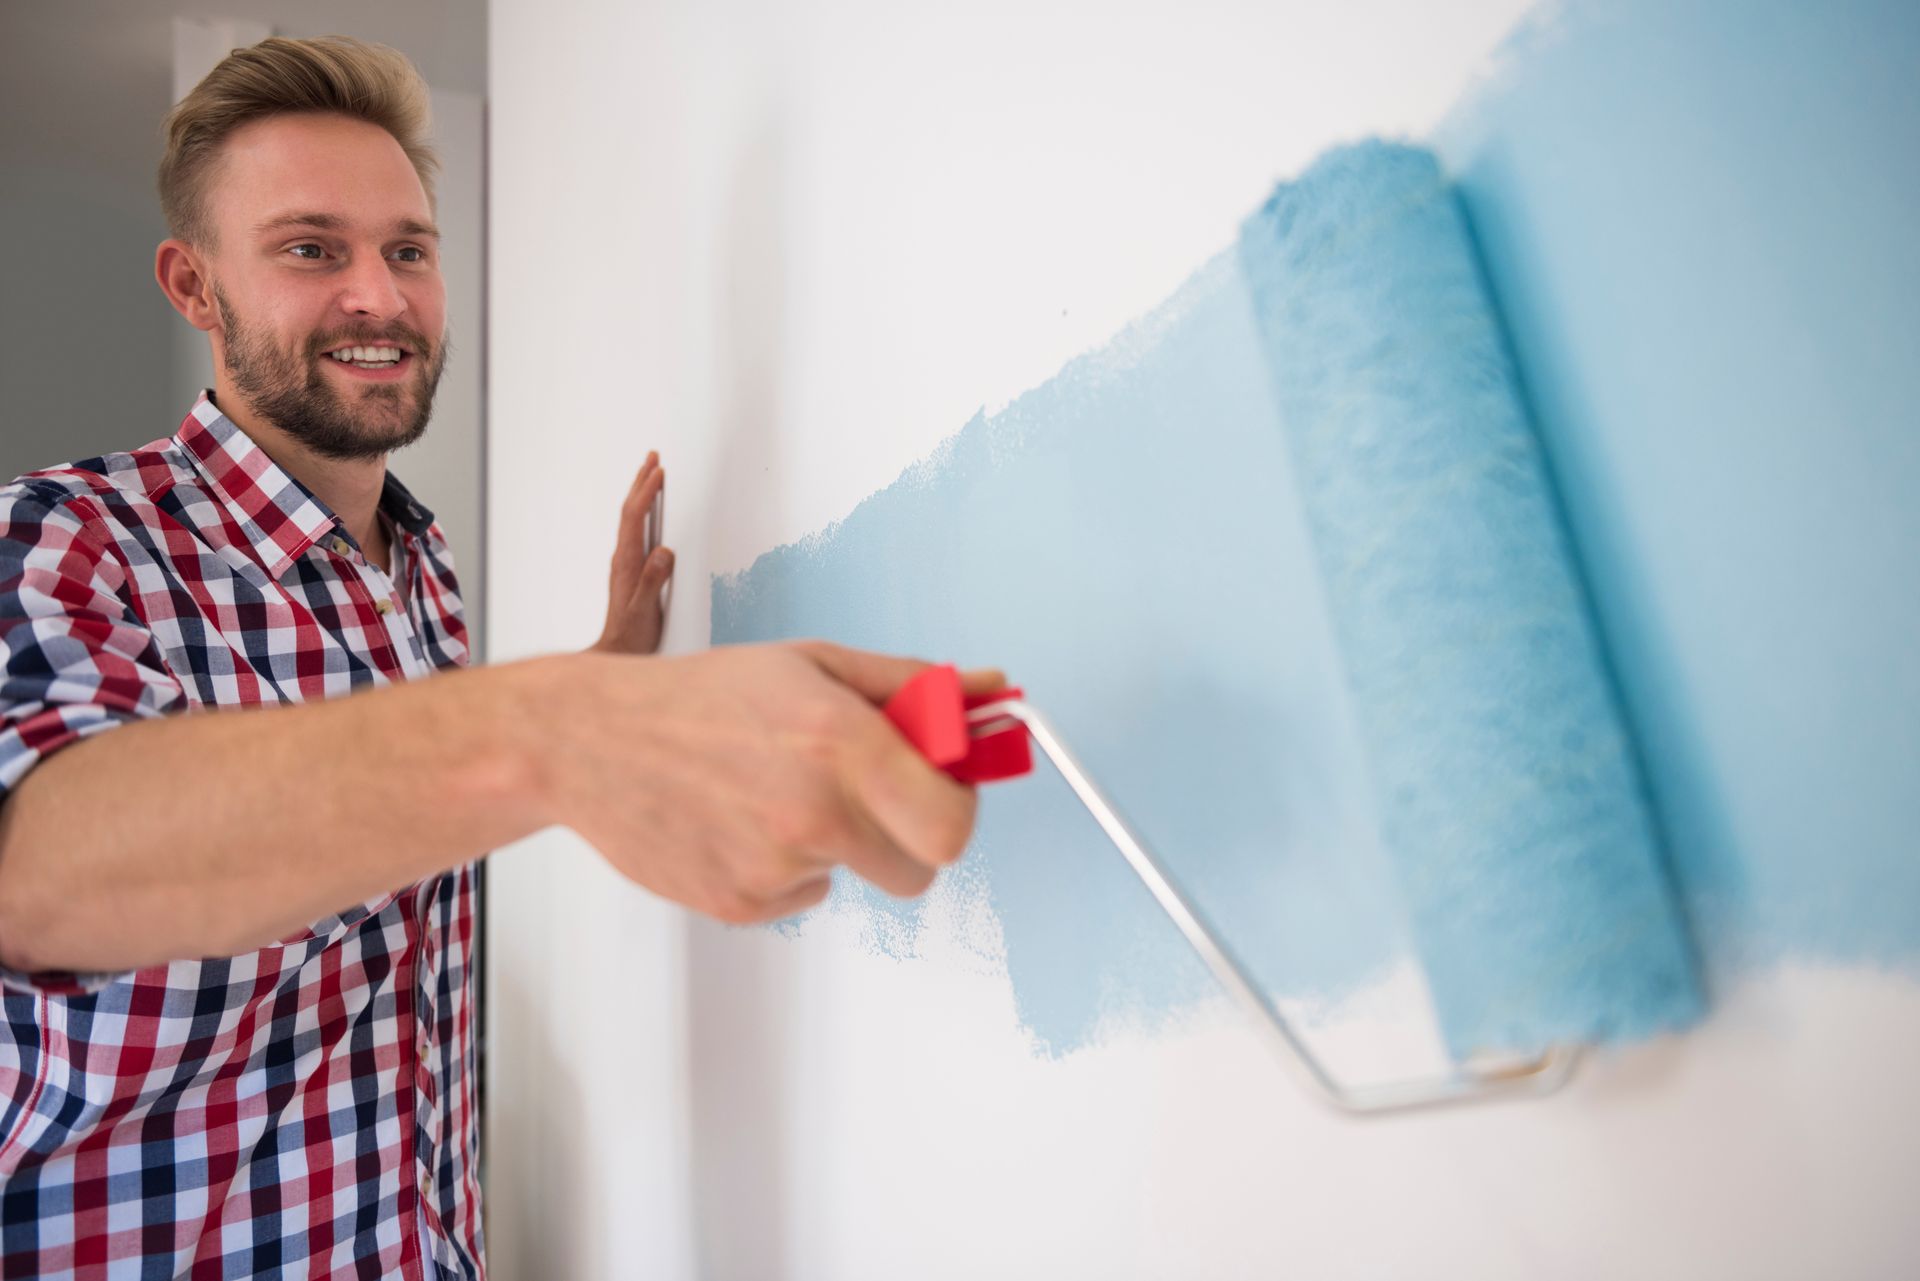 A man is painting a wall with a blue paint roller.